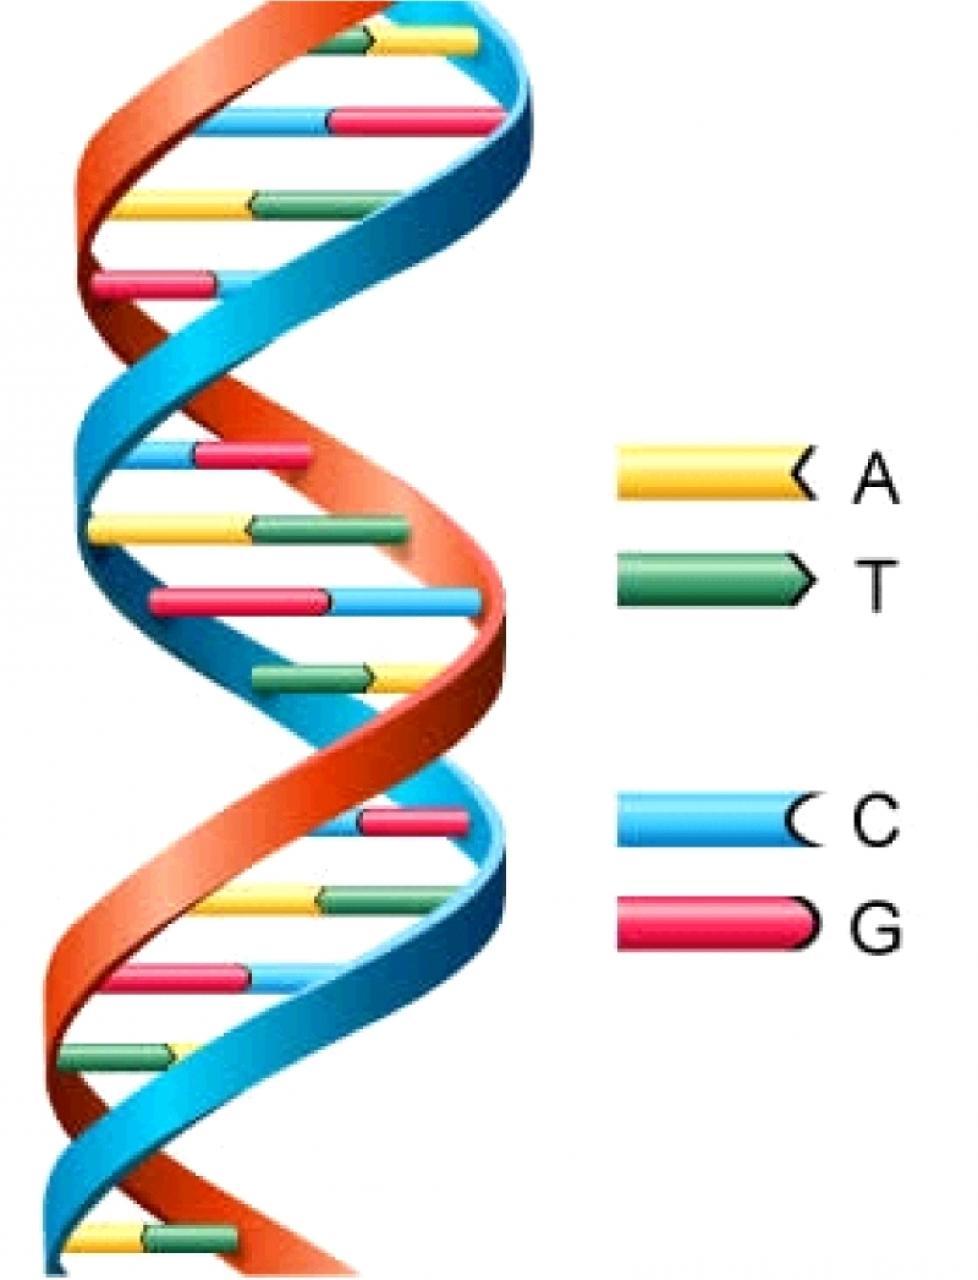 Make bacteria produce mrna and protein Purify the protein DNA cloning, amplification and expression of selected DNA sequences (e.g DNA encoding human Insulin) Package, Store, Q/C, transport.